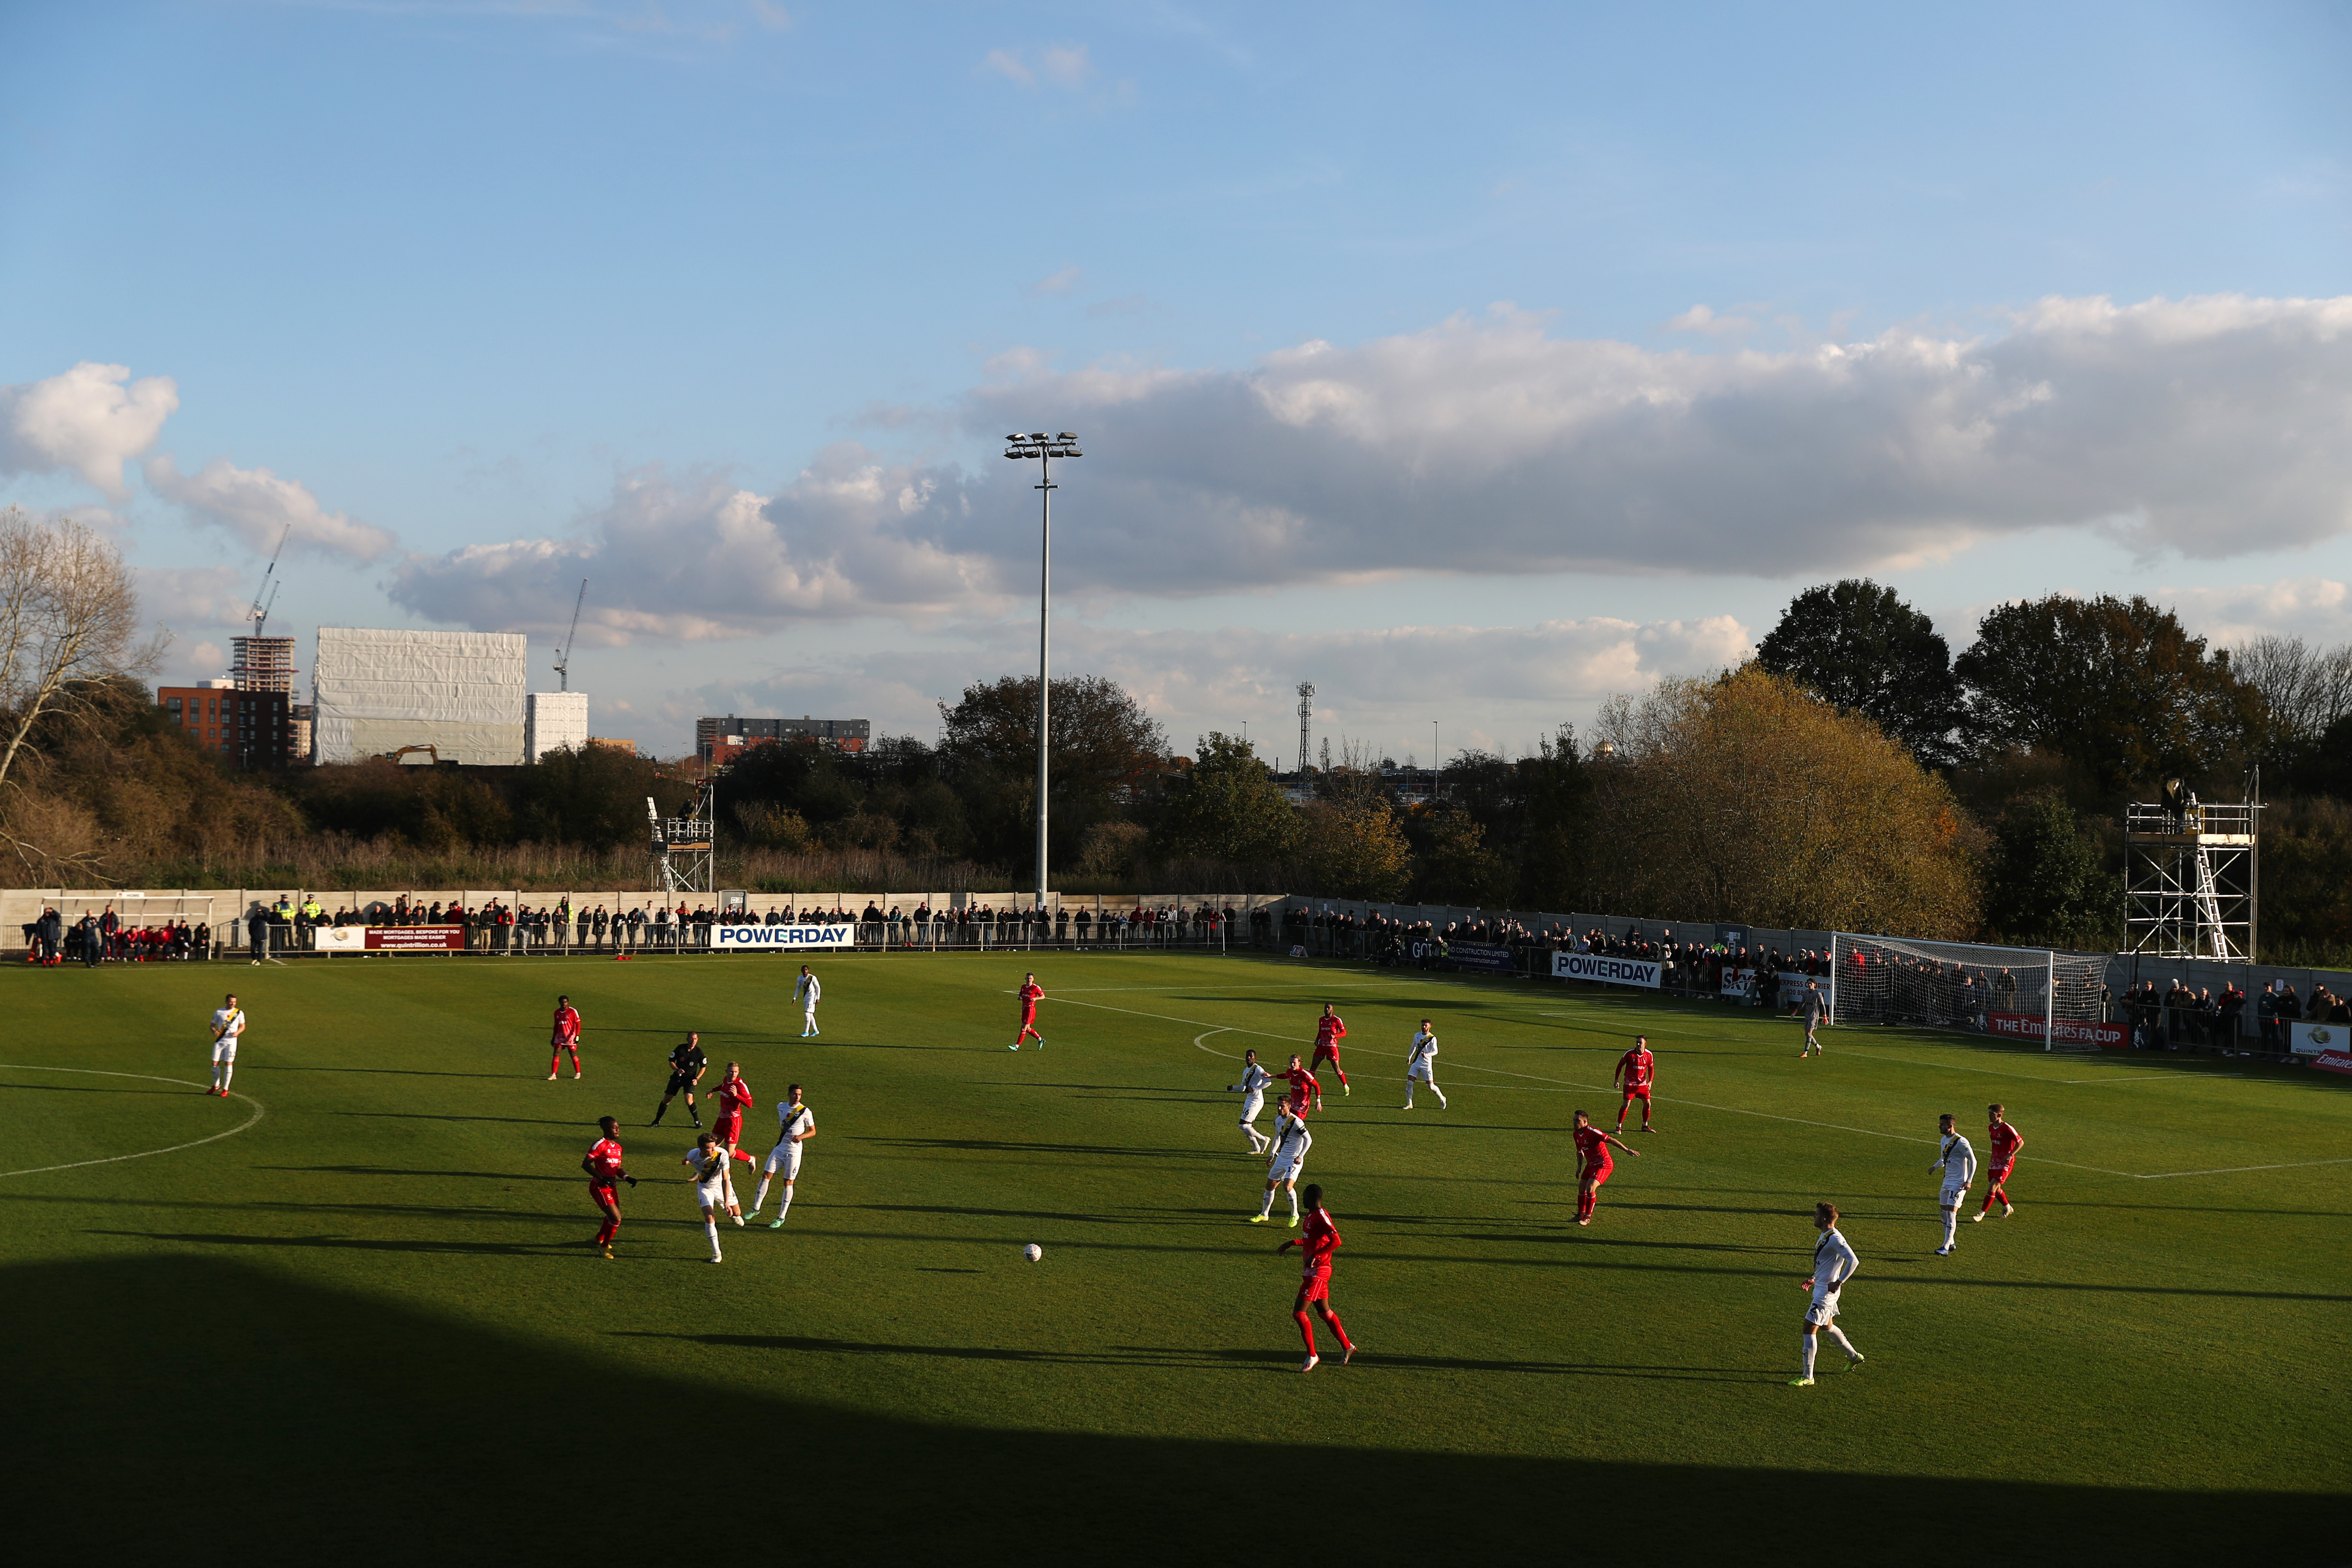 The FA Cup First Round match between Hayes & Yeading and Oxford United at SKYEx Community Stadium on November 10, 2019, in Hayes, England. | Source: Getty Images